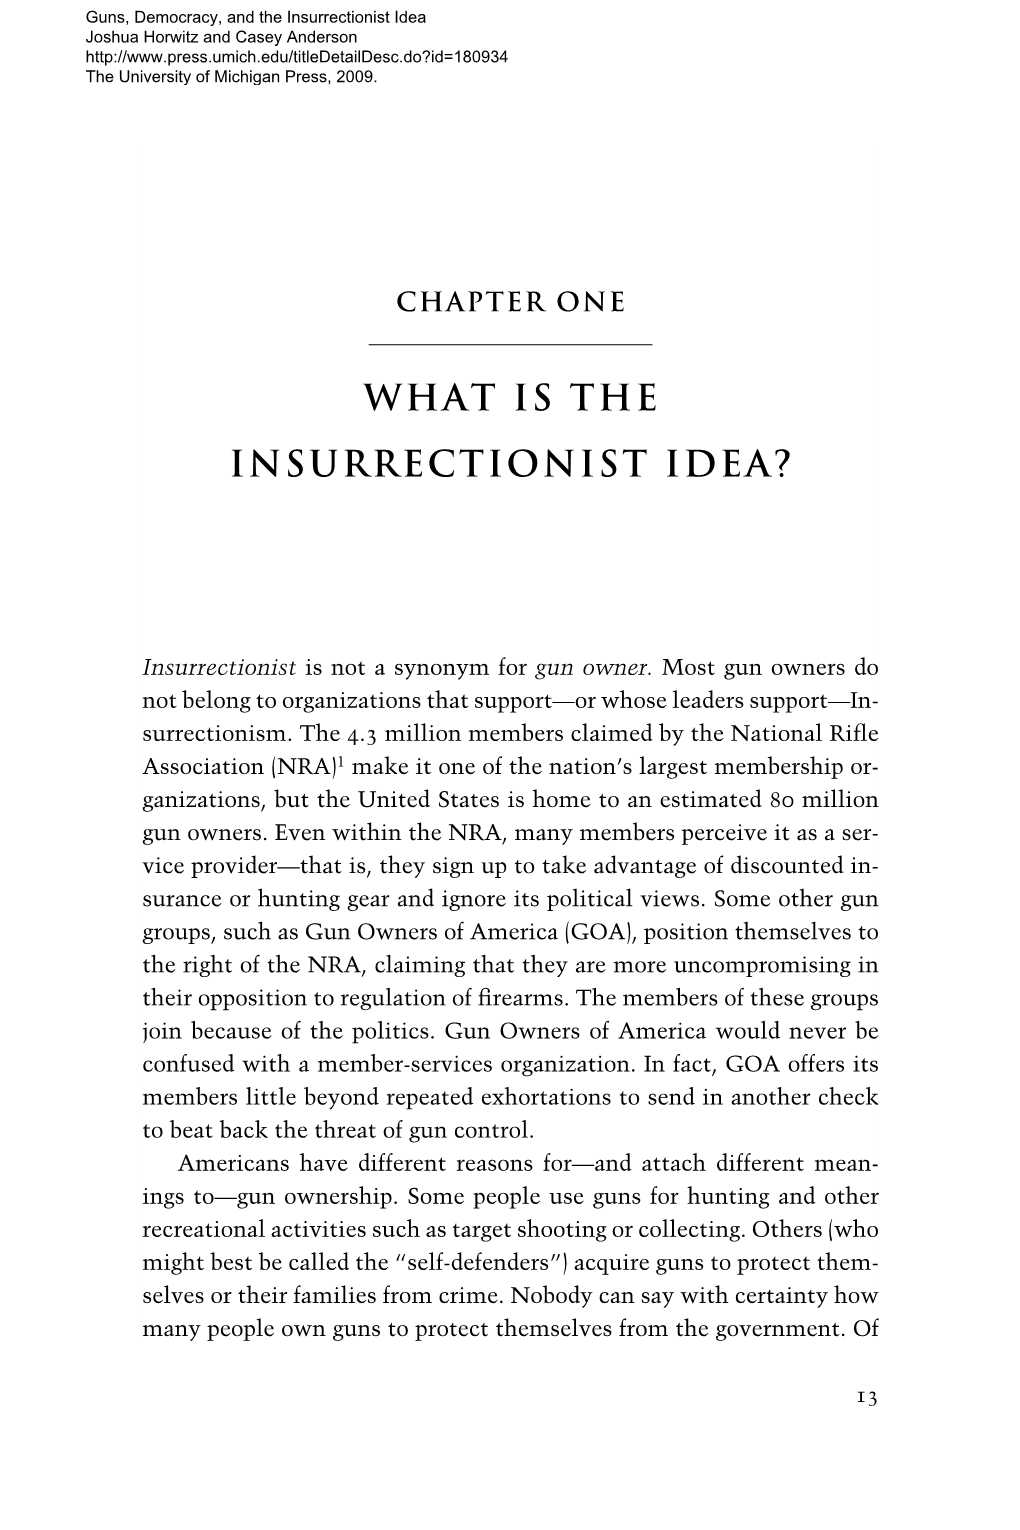 What Is the Insurrectionist Idea?